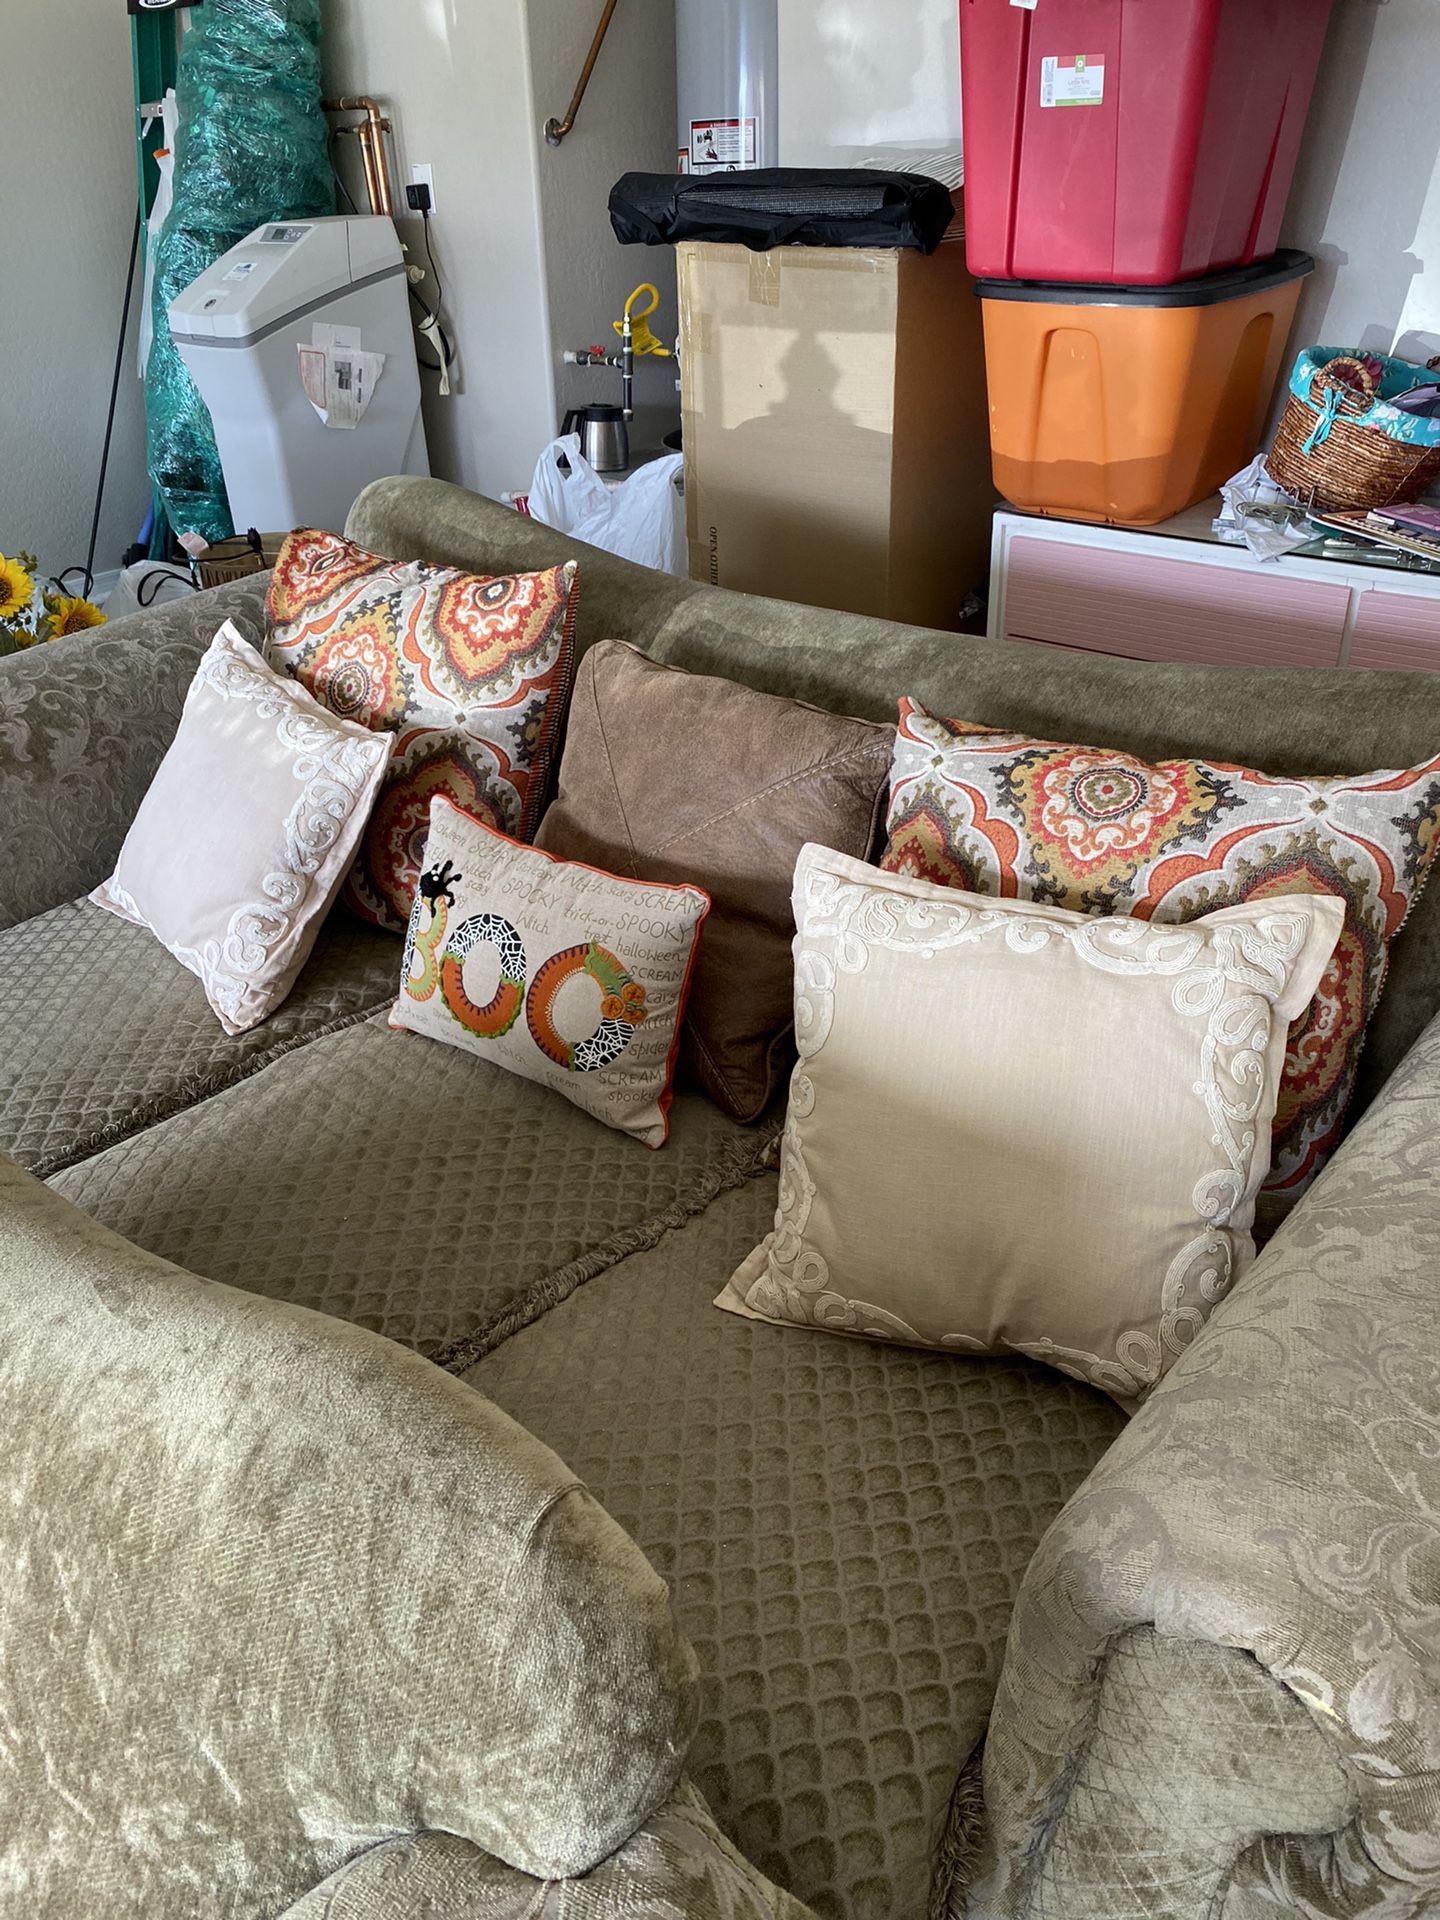 Couch, over-sized chair, pillows, and ottoman 🥰 Garage sale Saturday!! Msg for address!!